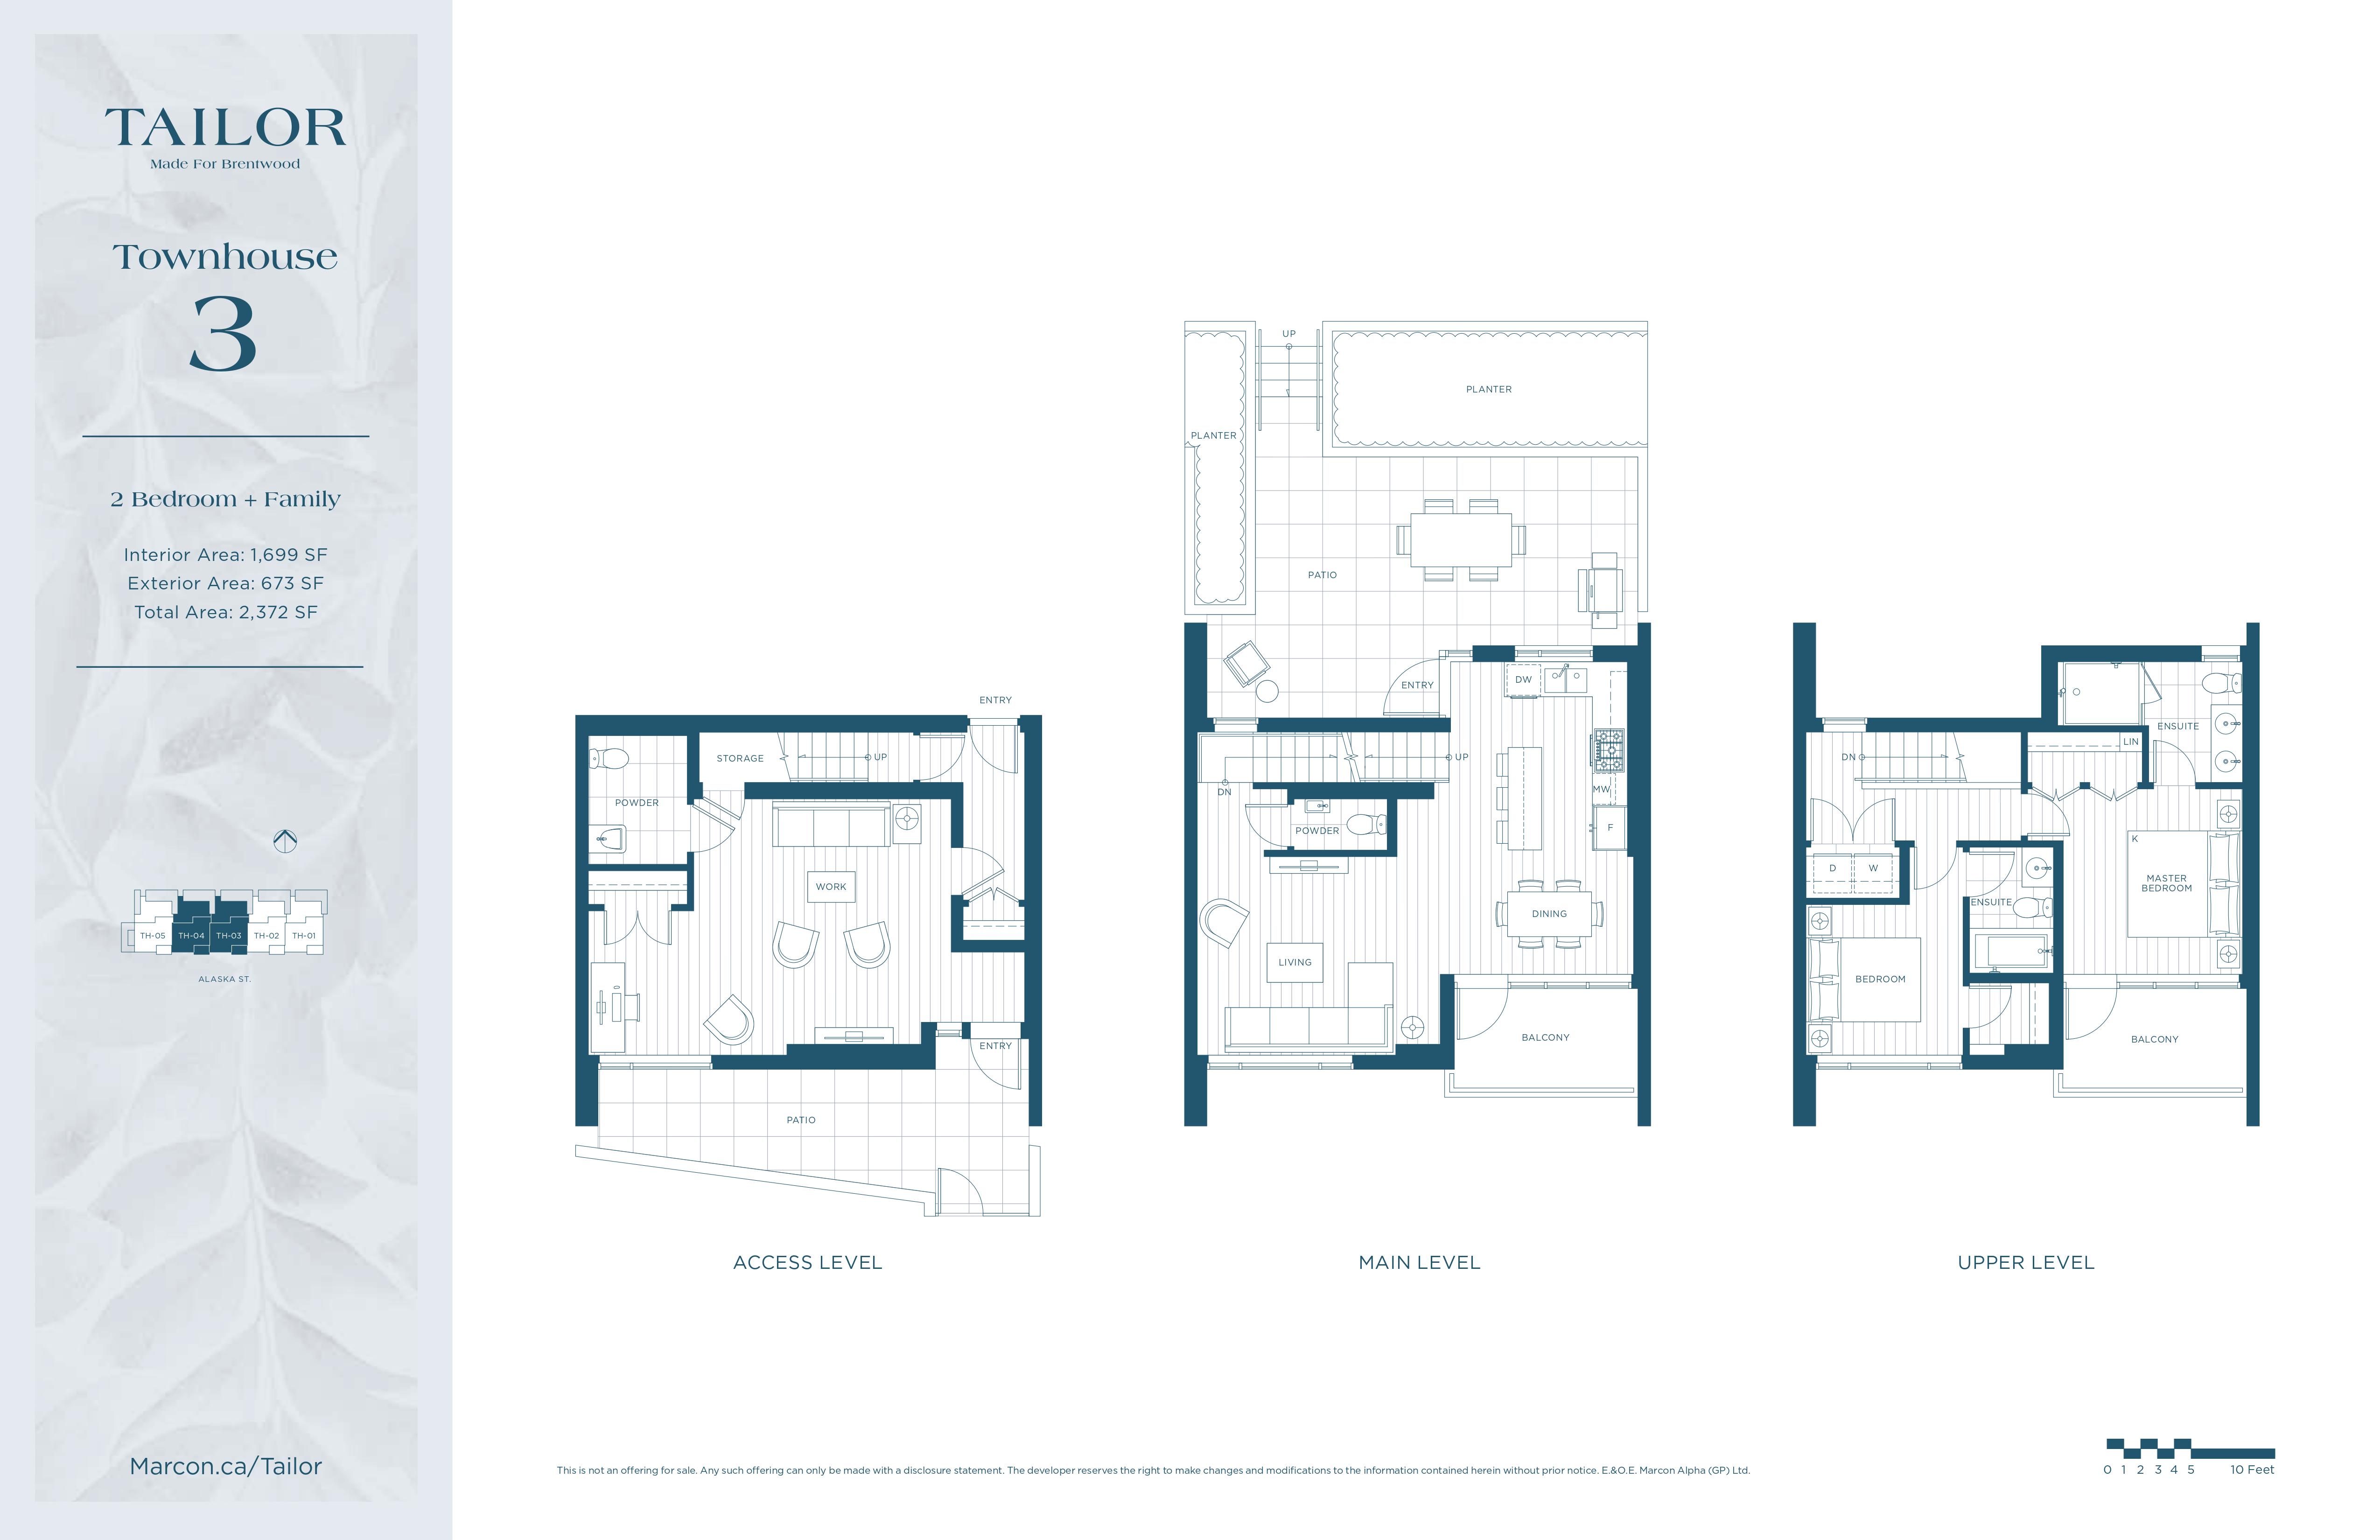  Townhouse 3  Floor Plan of Tailor Condos with undefined beds